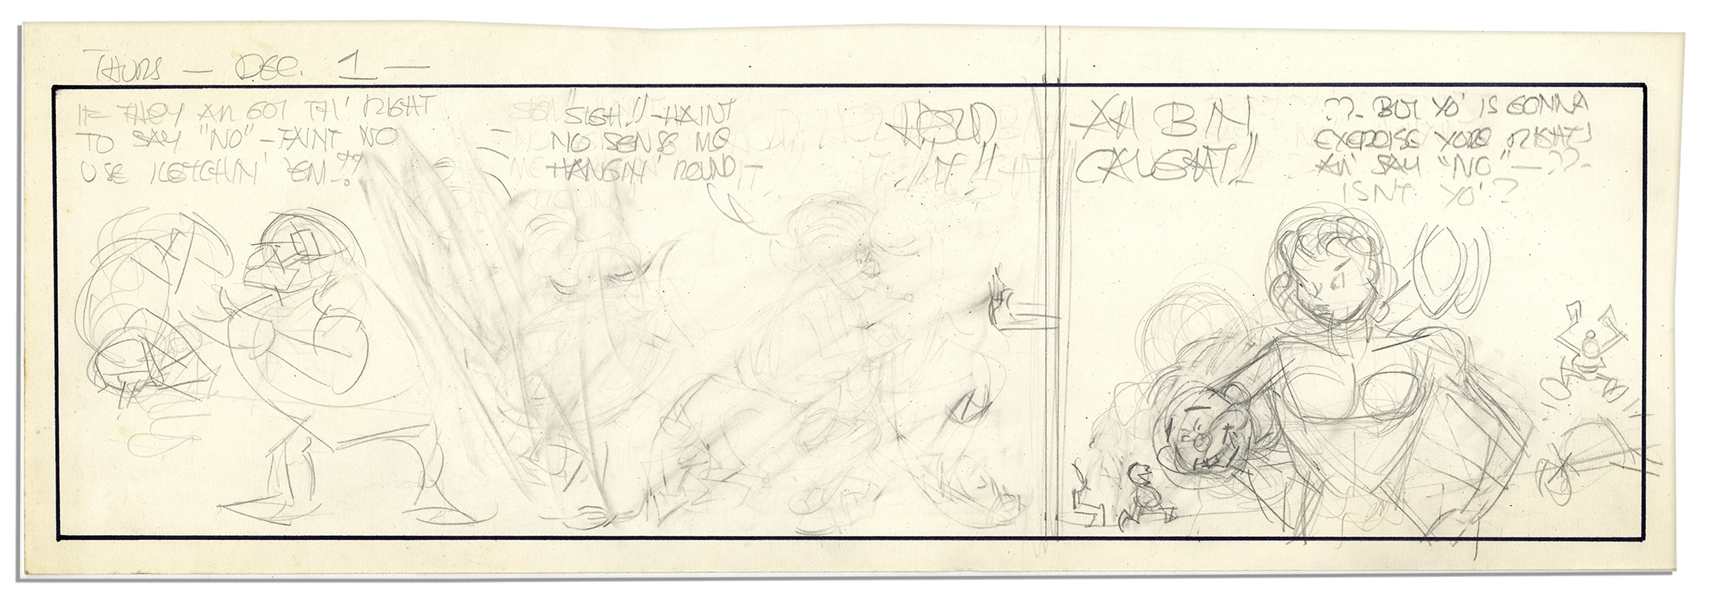 Al Capp ''Li'l Abner'' Unfinished Hand-Drawn Comic Strip in Pencil -- Very Preliminary Sketch With Dialogue -- 18.75'' x 6.25'' With Some Erasing, Else Very Good -- From the Al Capp Estate